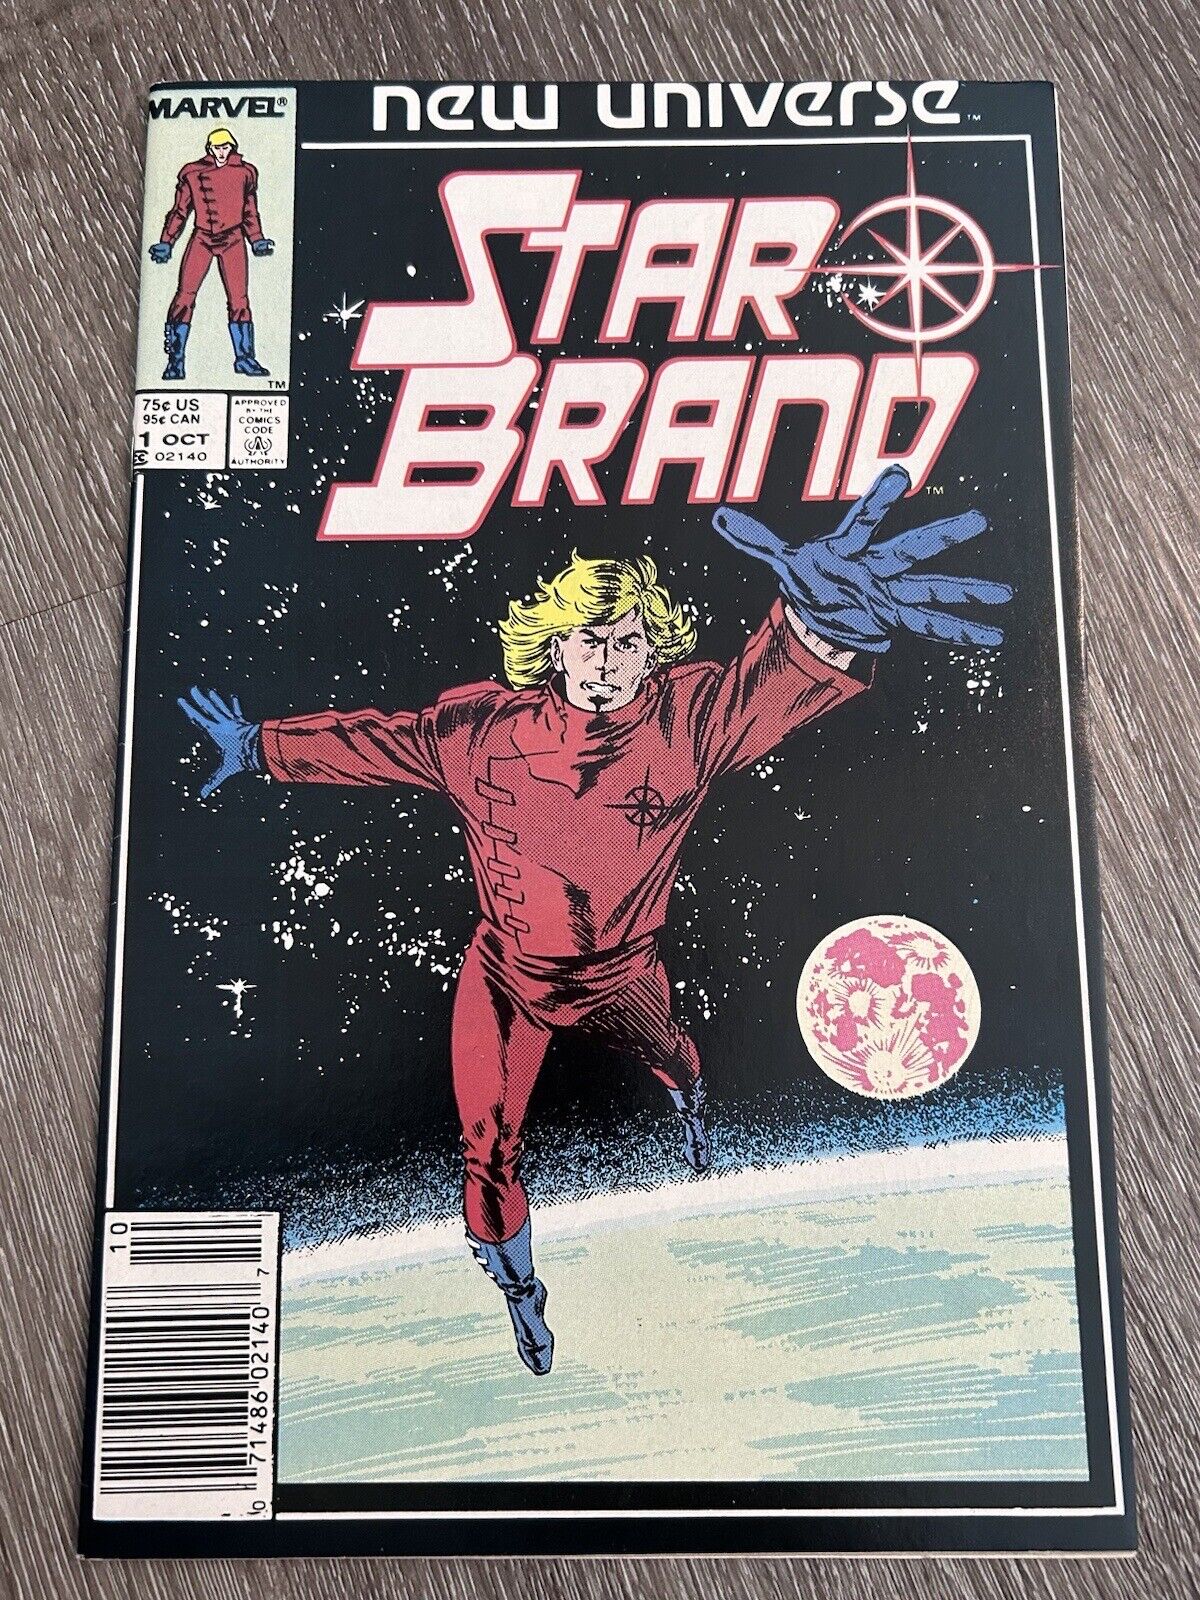 New Universe Star Brand #1 Oct 1986 Marvel Comics NM Newsstand Bagged Boarded